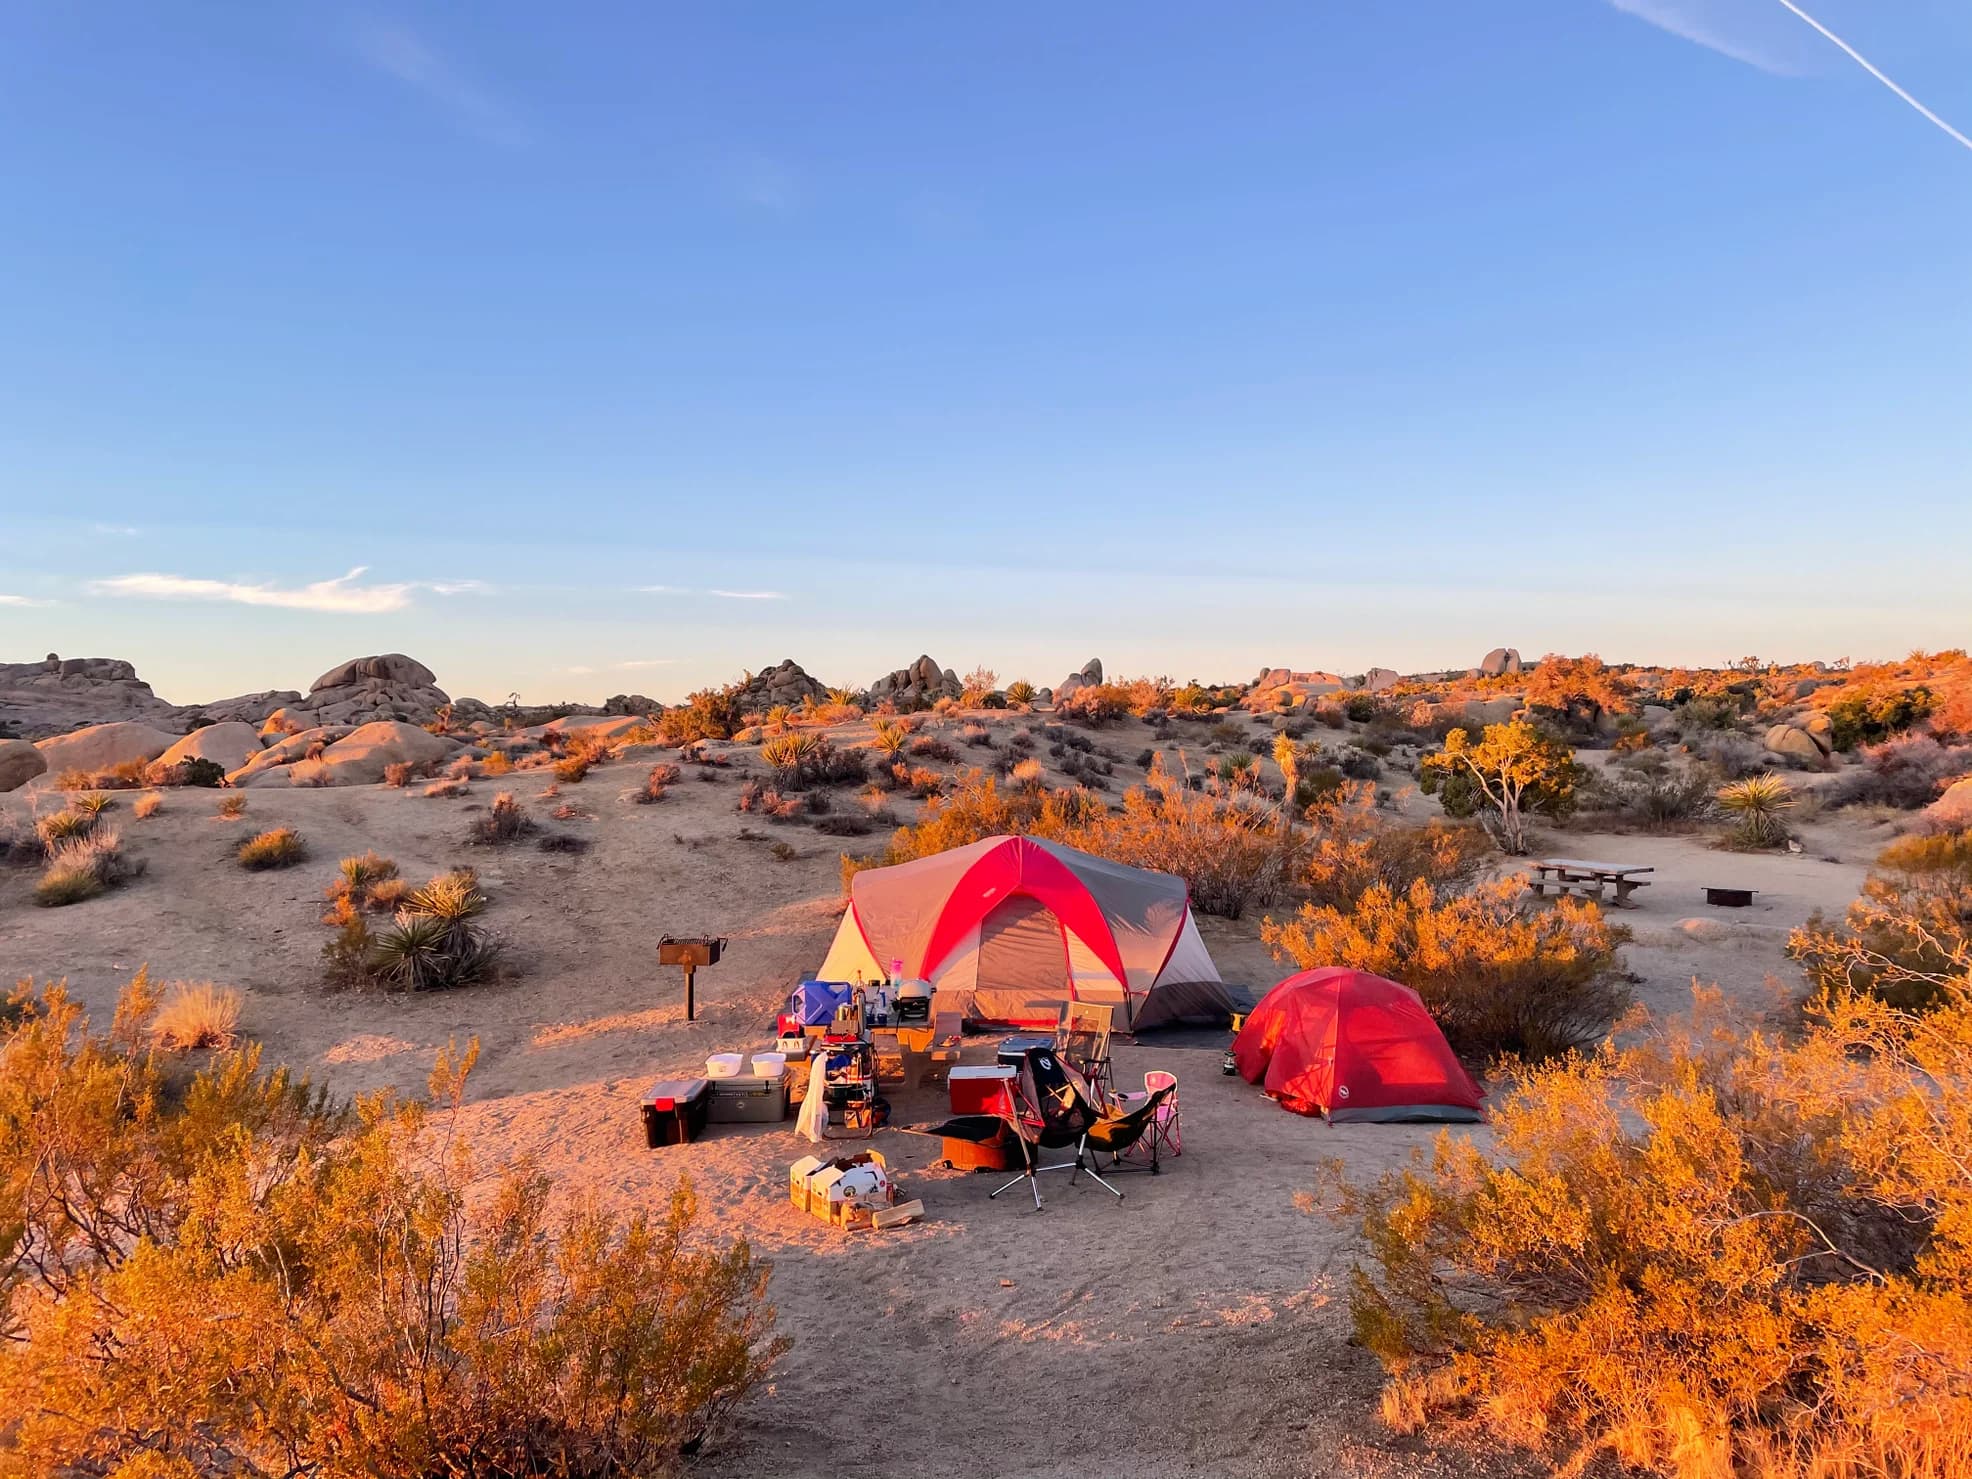 Golden hour at a desert campsite with a red tent surrounded by brush and red rock formations.